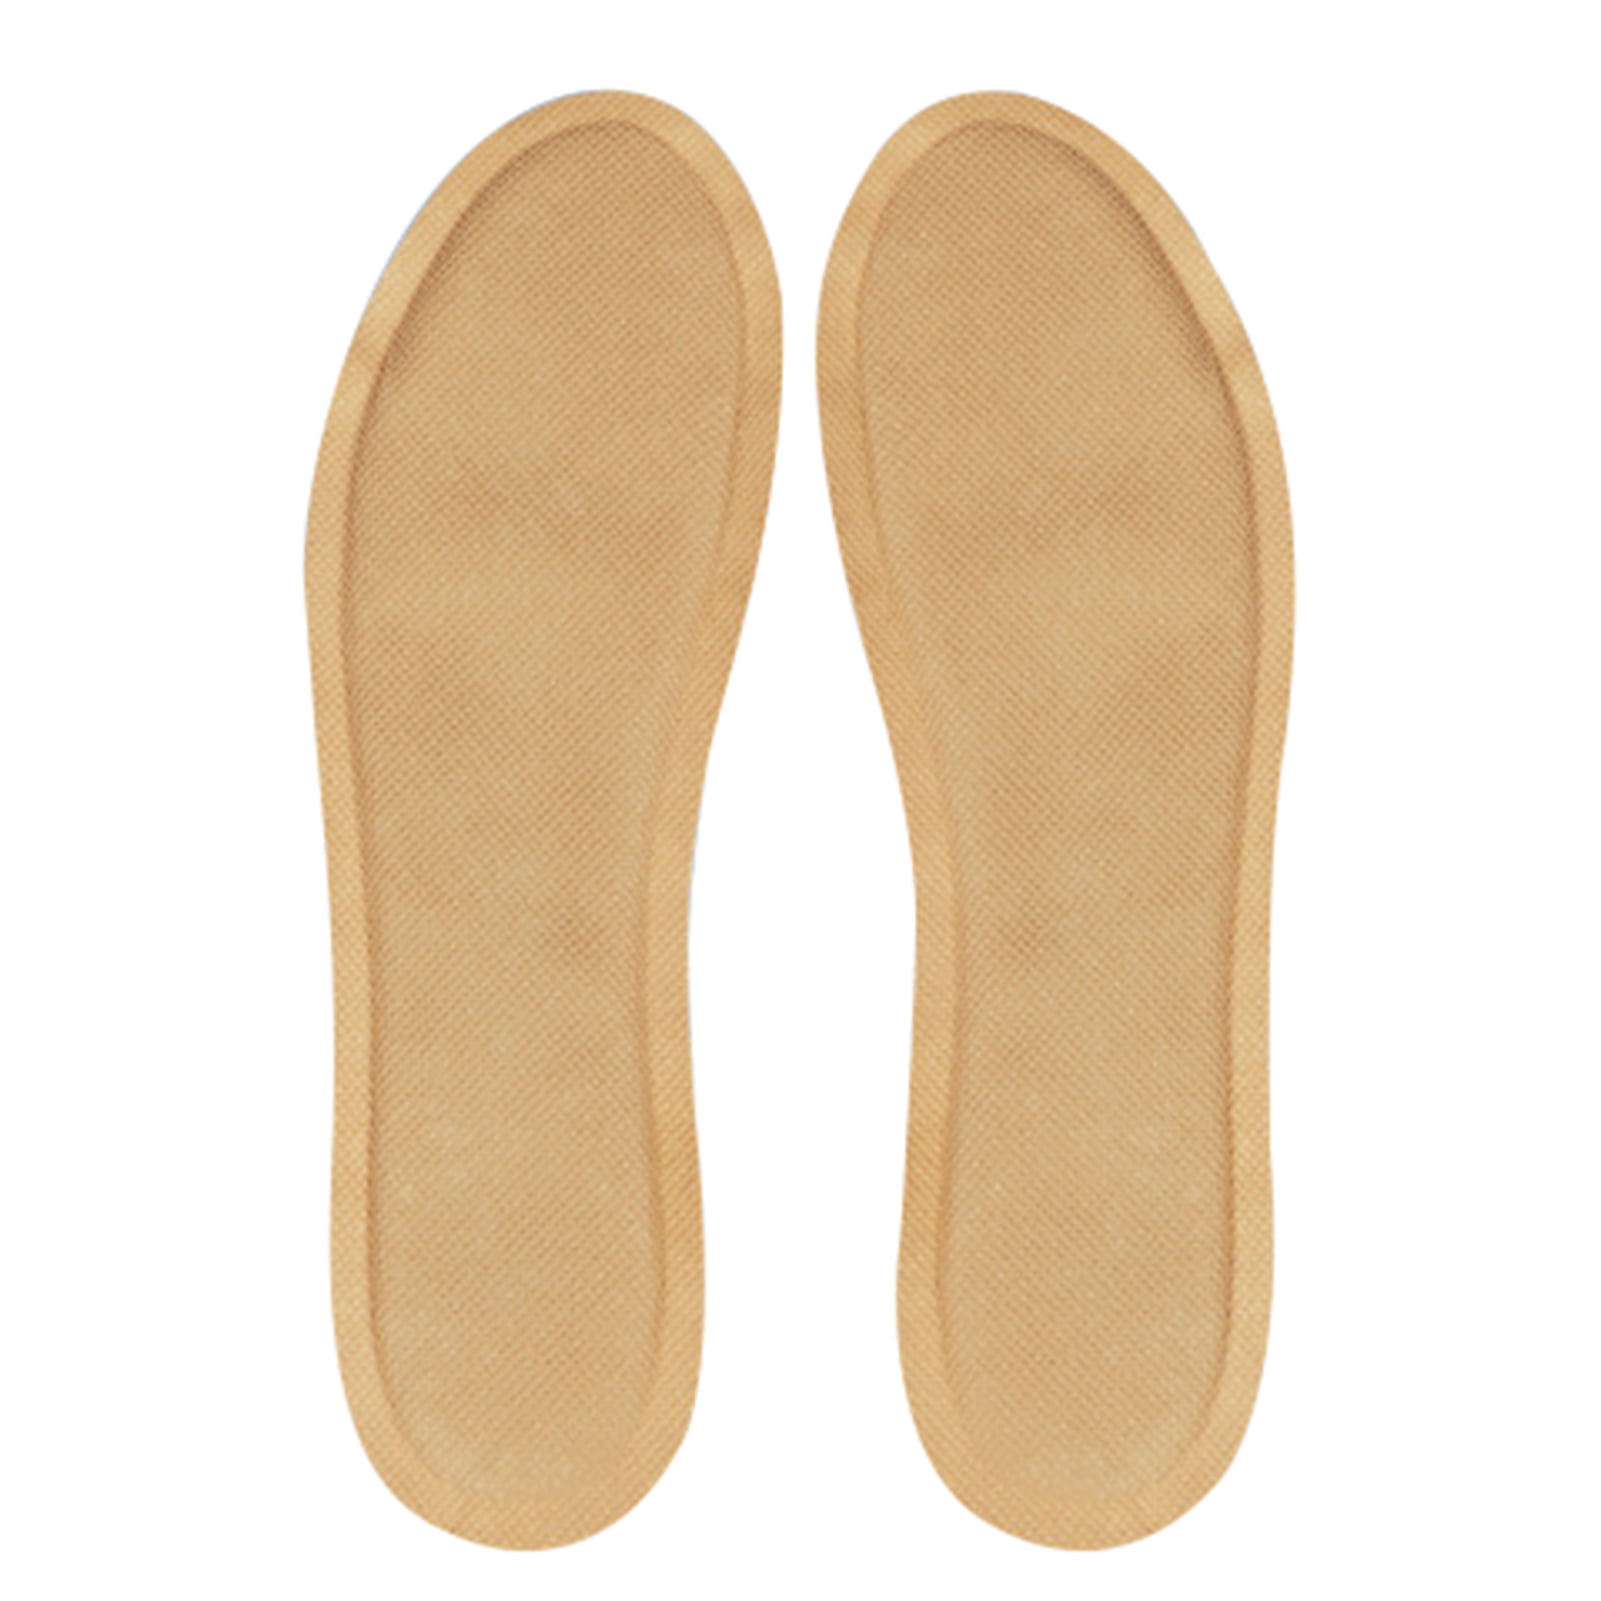 Hand-Woven Bamboo Charcoal Linen Insoles Breathable Anti-Bacterial Insole Supply 